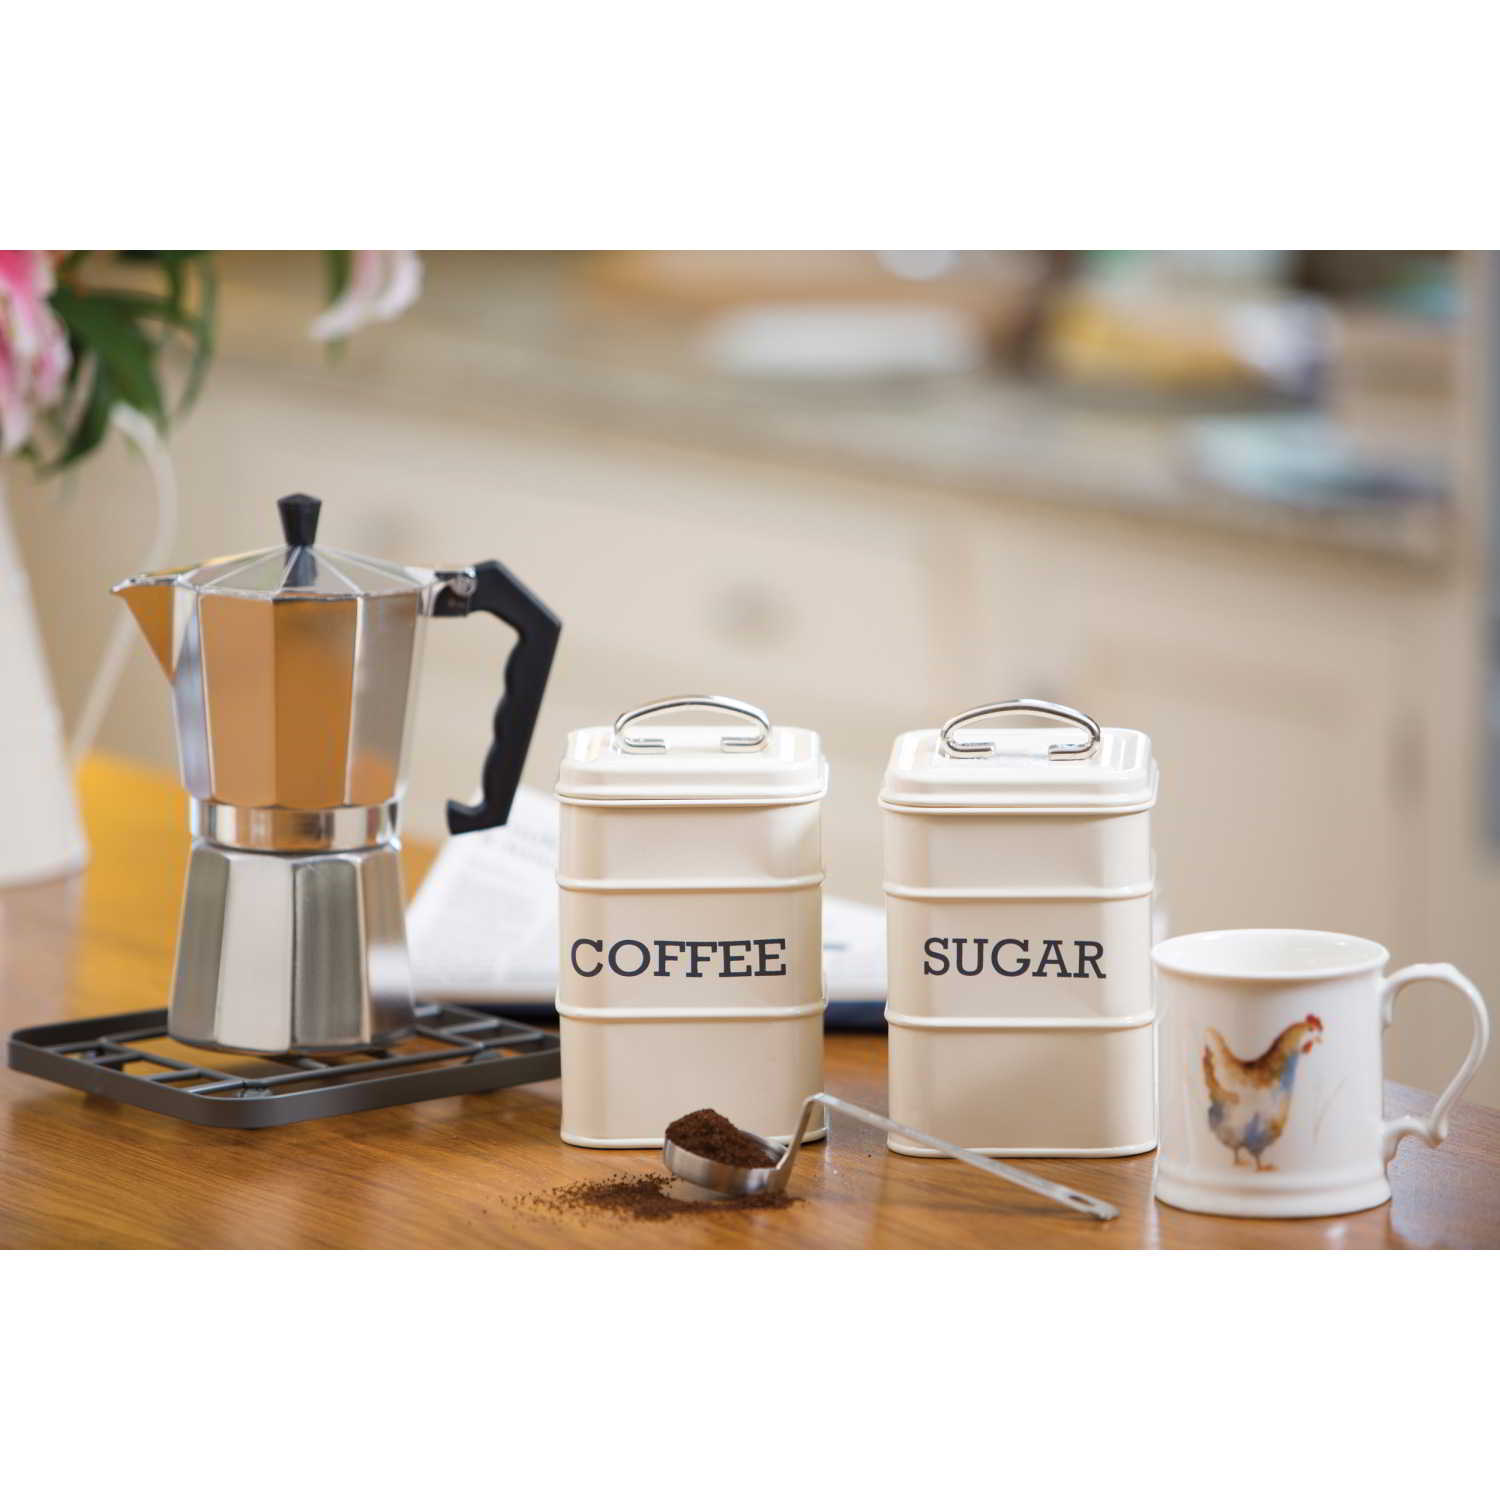 KitchenCraft Living Nostalgia Tea, Coffee and Sugar Canisters in